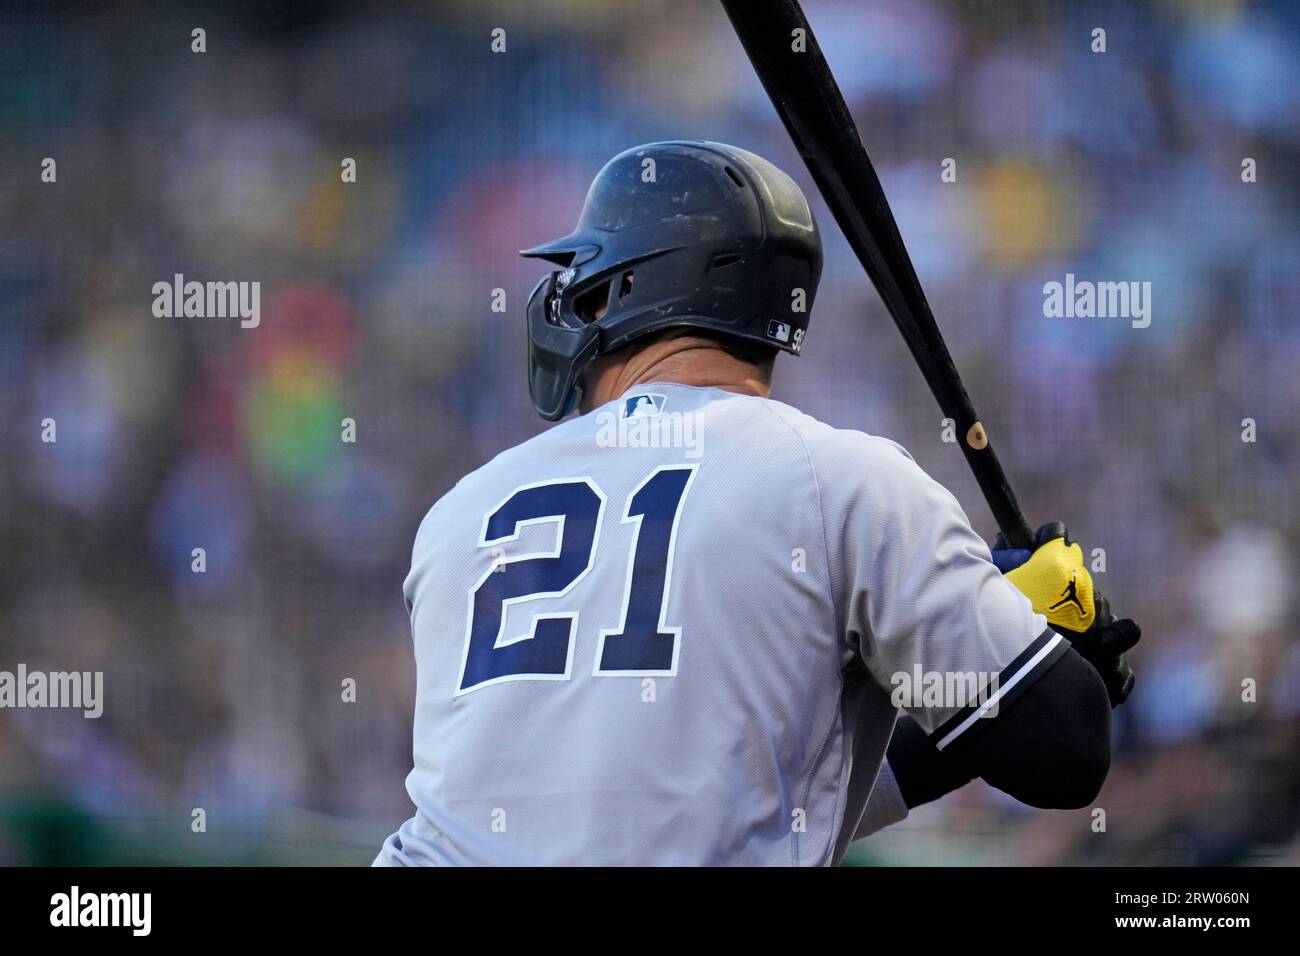 New York Yankees' Aaron Judge waits on deck, wearing the number 21